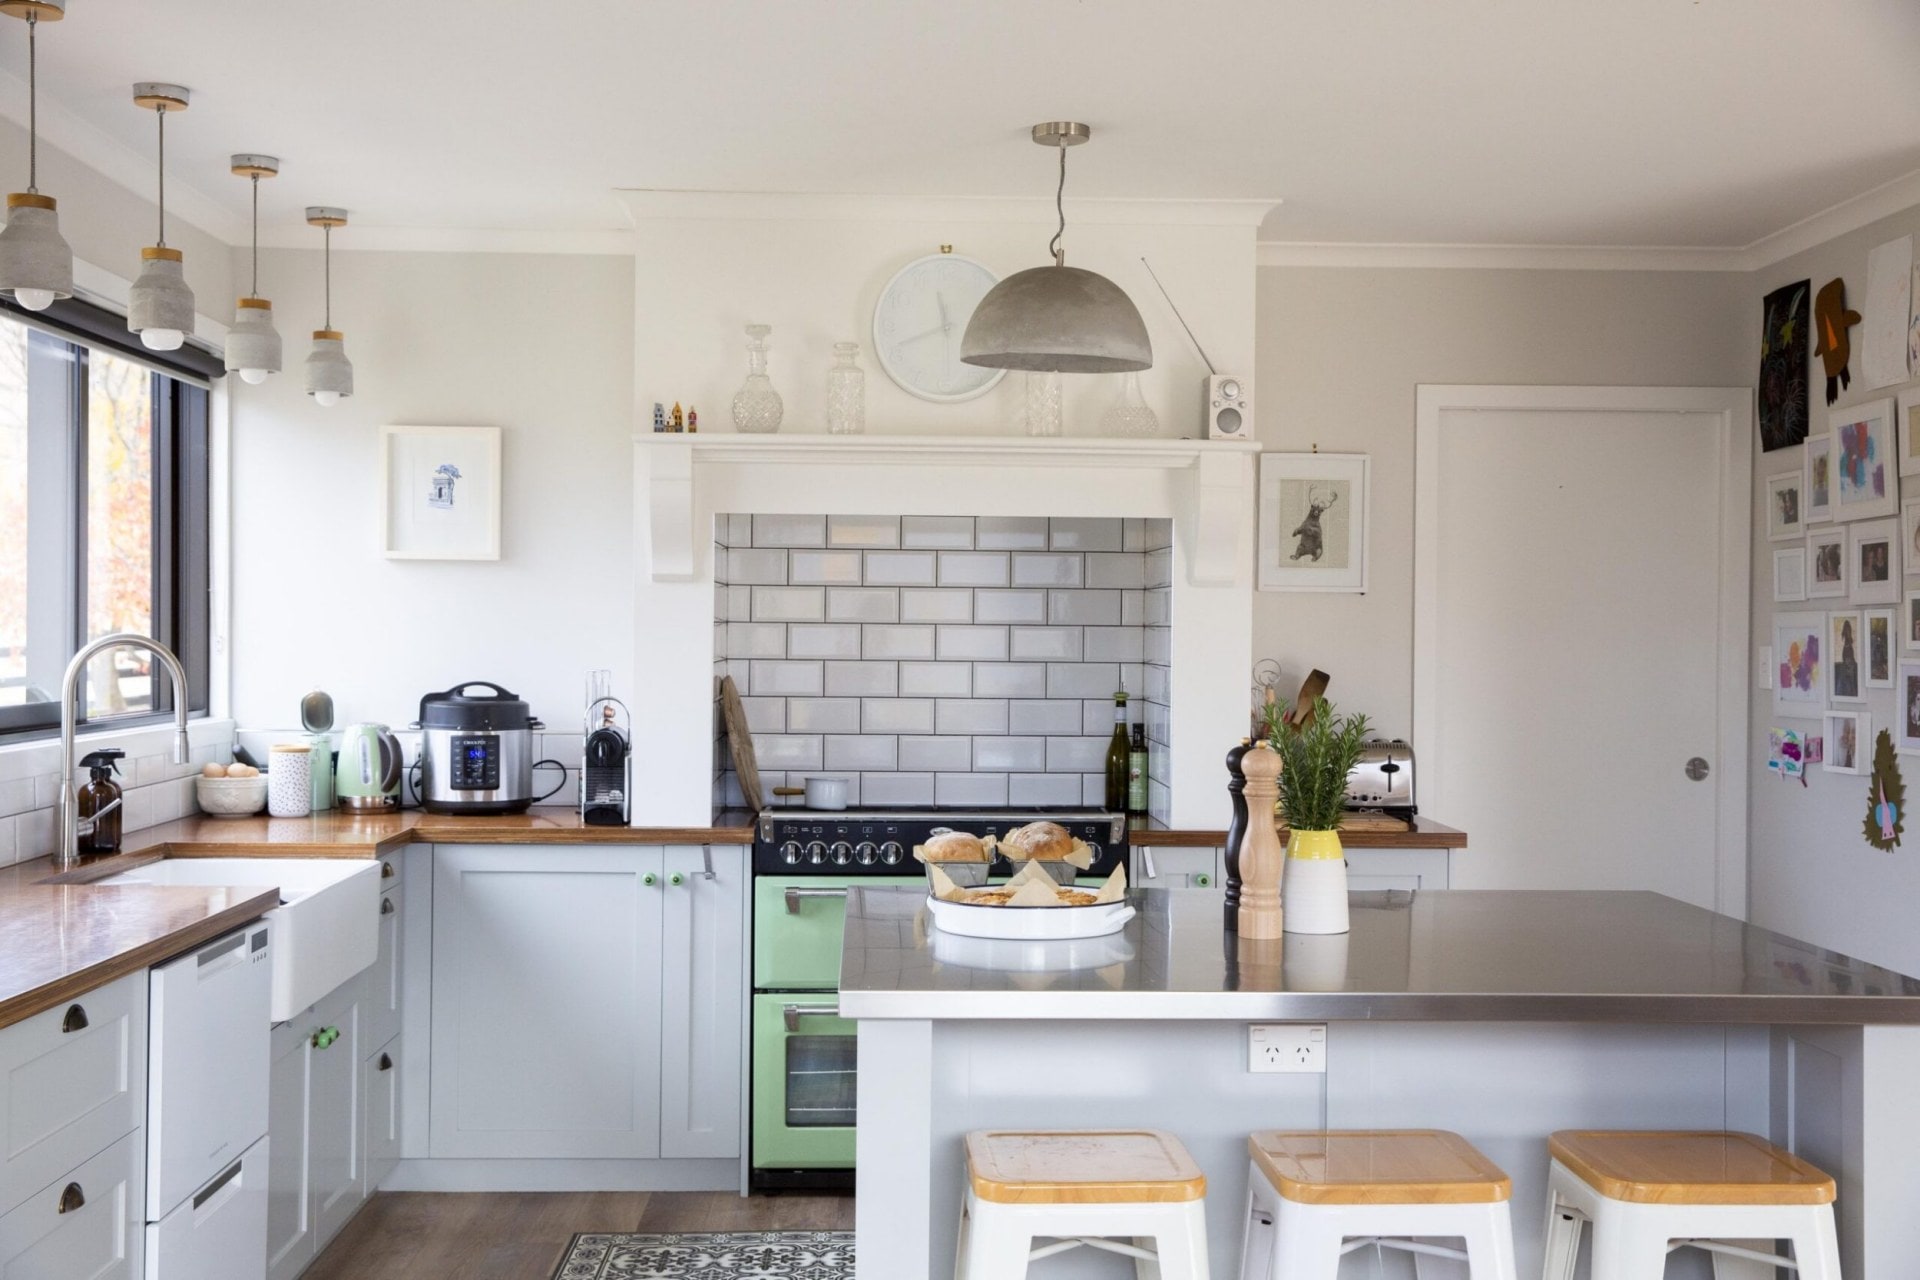 A white country style kitchen with a silver island, subway splashback tiles and hanging lights